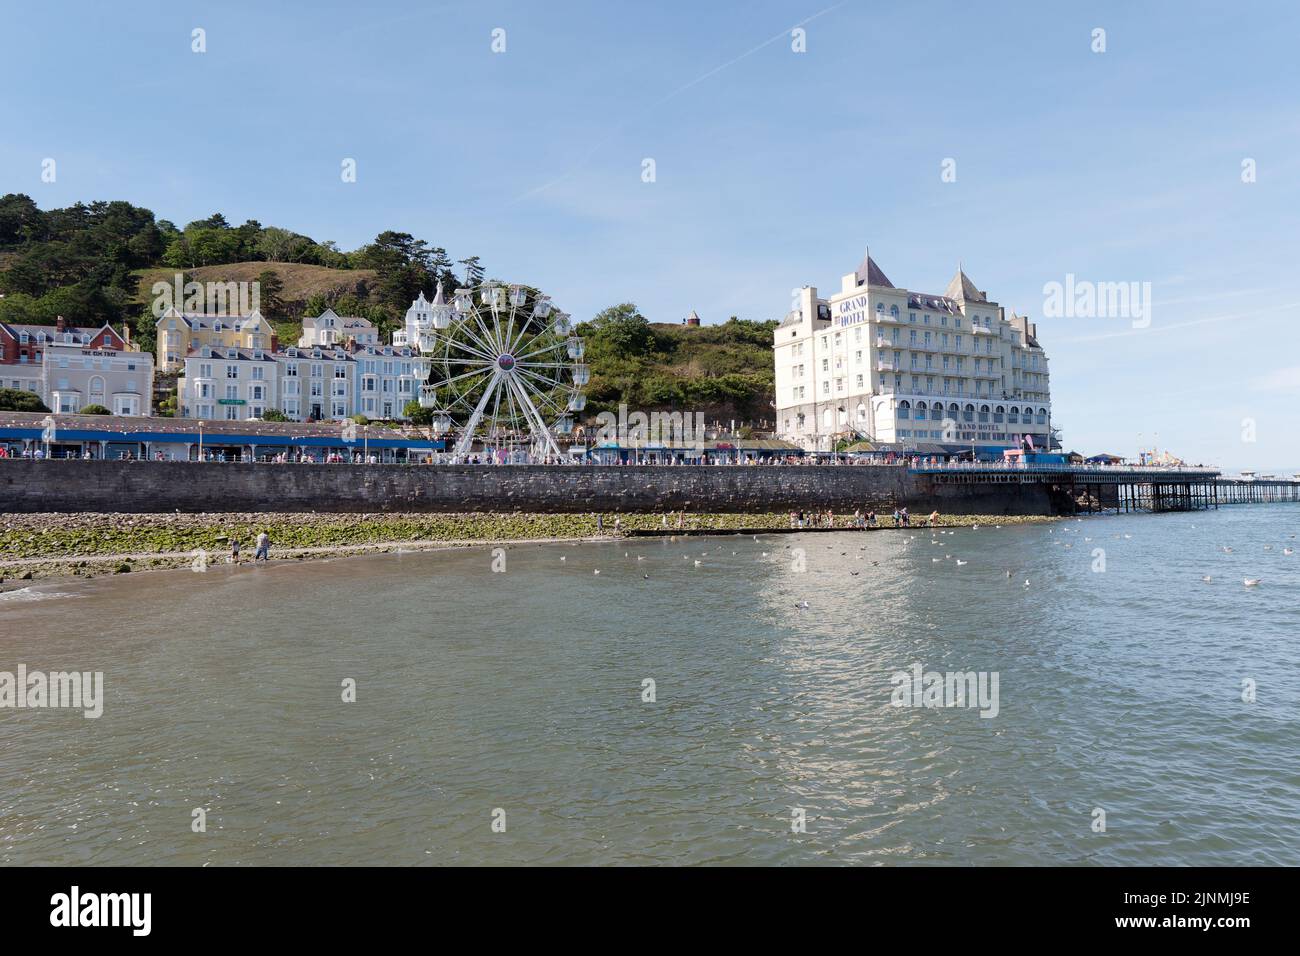 Llandudno, Clwyd, Wales, August 07 2022: Grand Hotel and big wheel as seen from the sea. Stock Photo